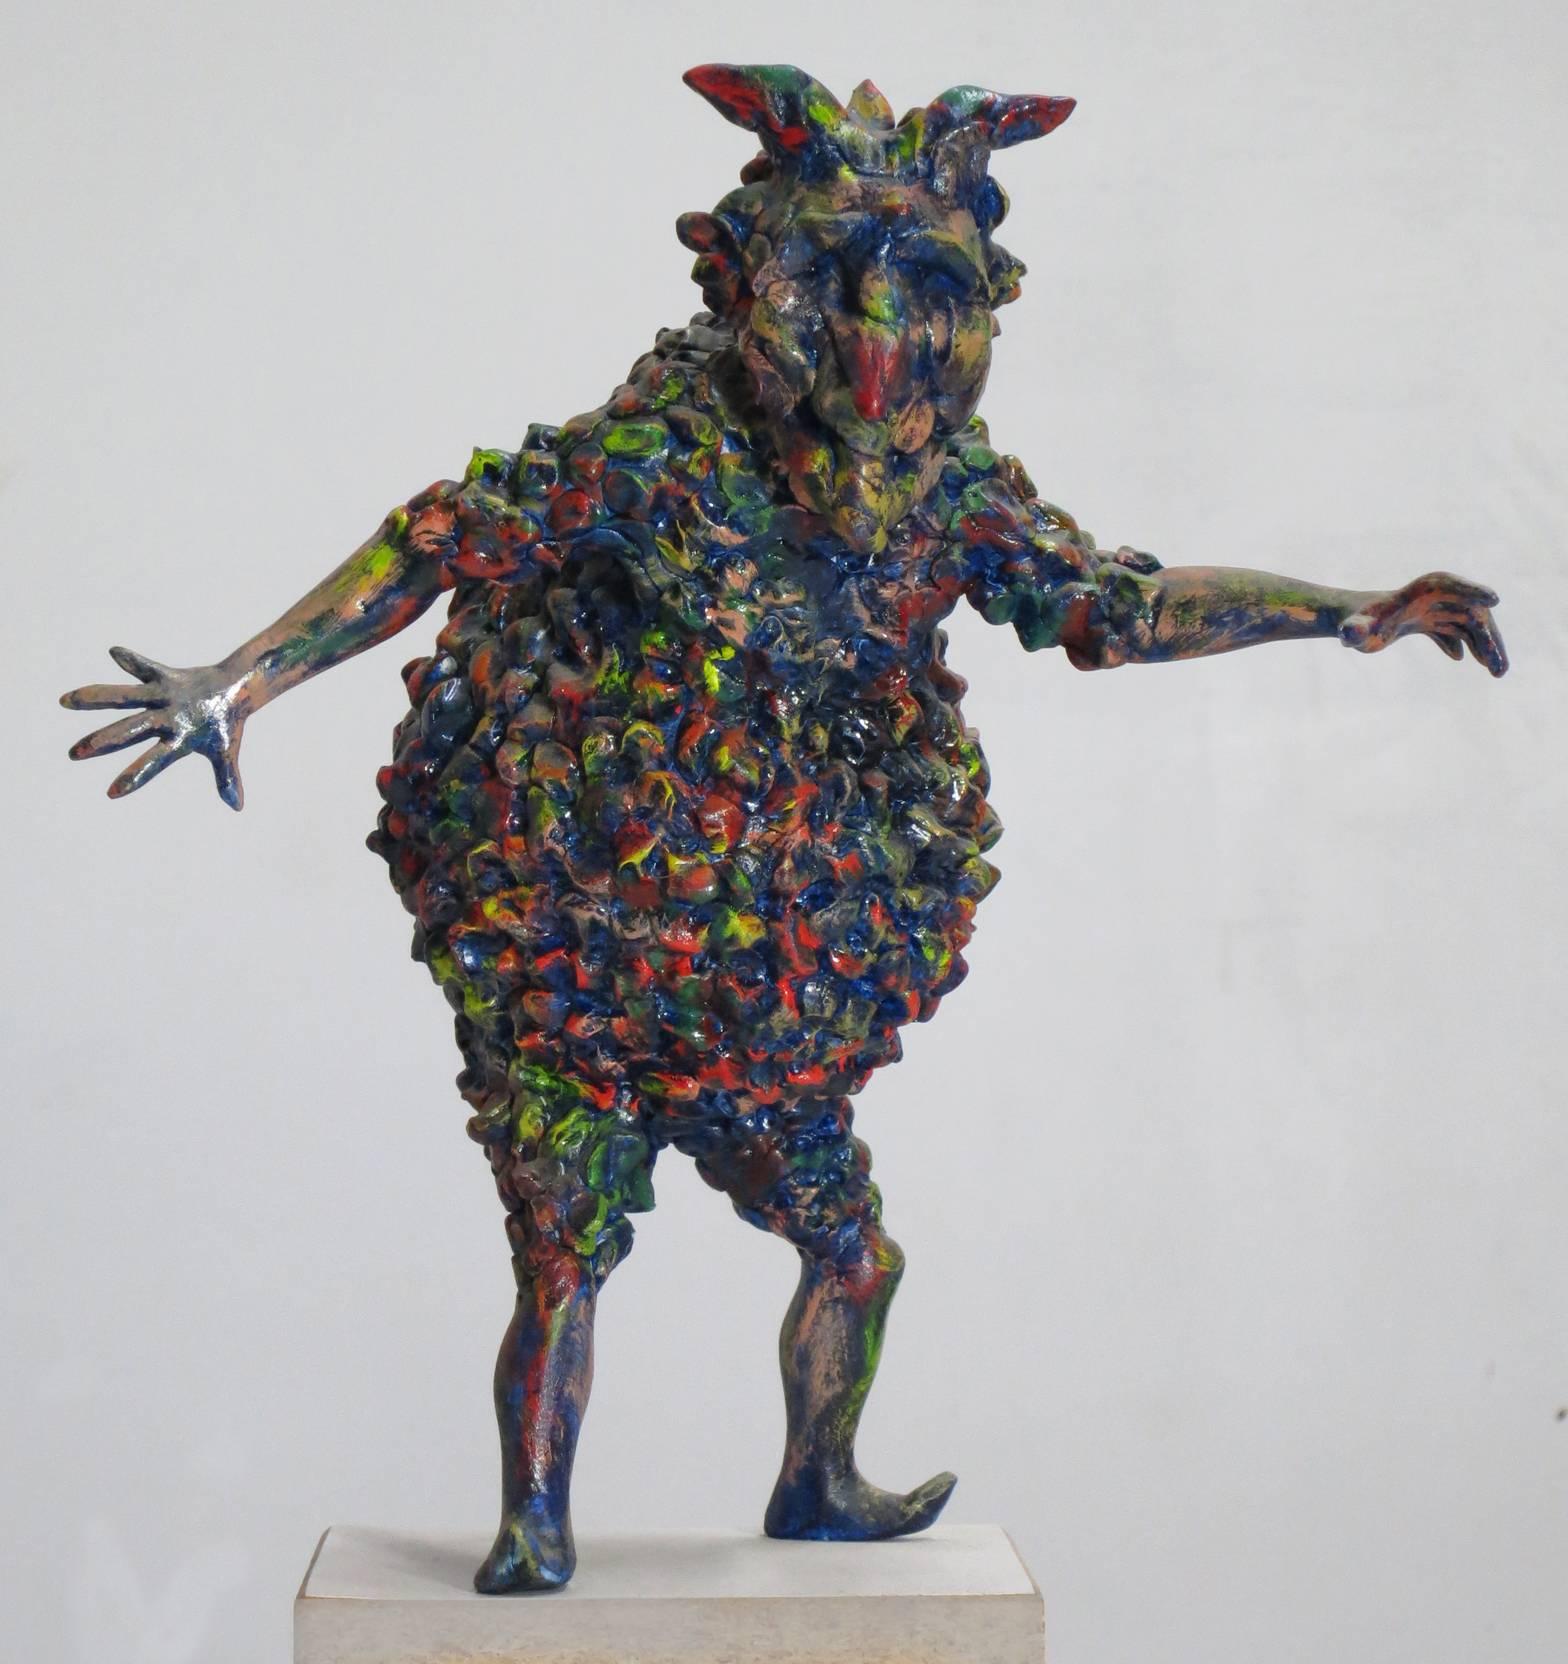 Howard Kalish Figurative Sculpture – “Small Rigoletto”, jester of Verdi opera, romps in reds, blues, and greens